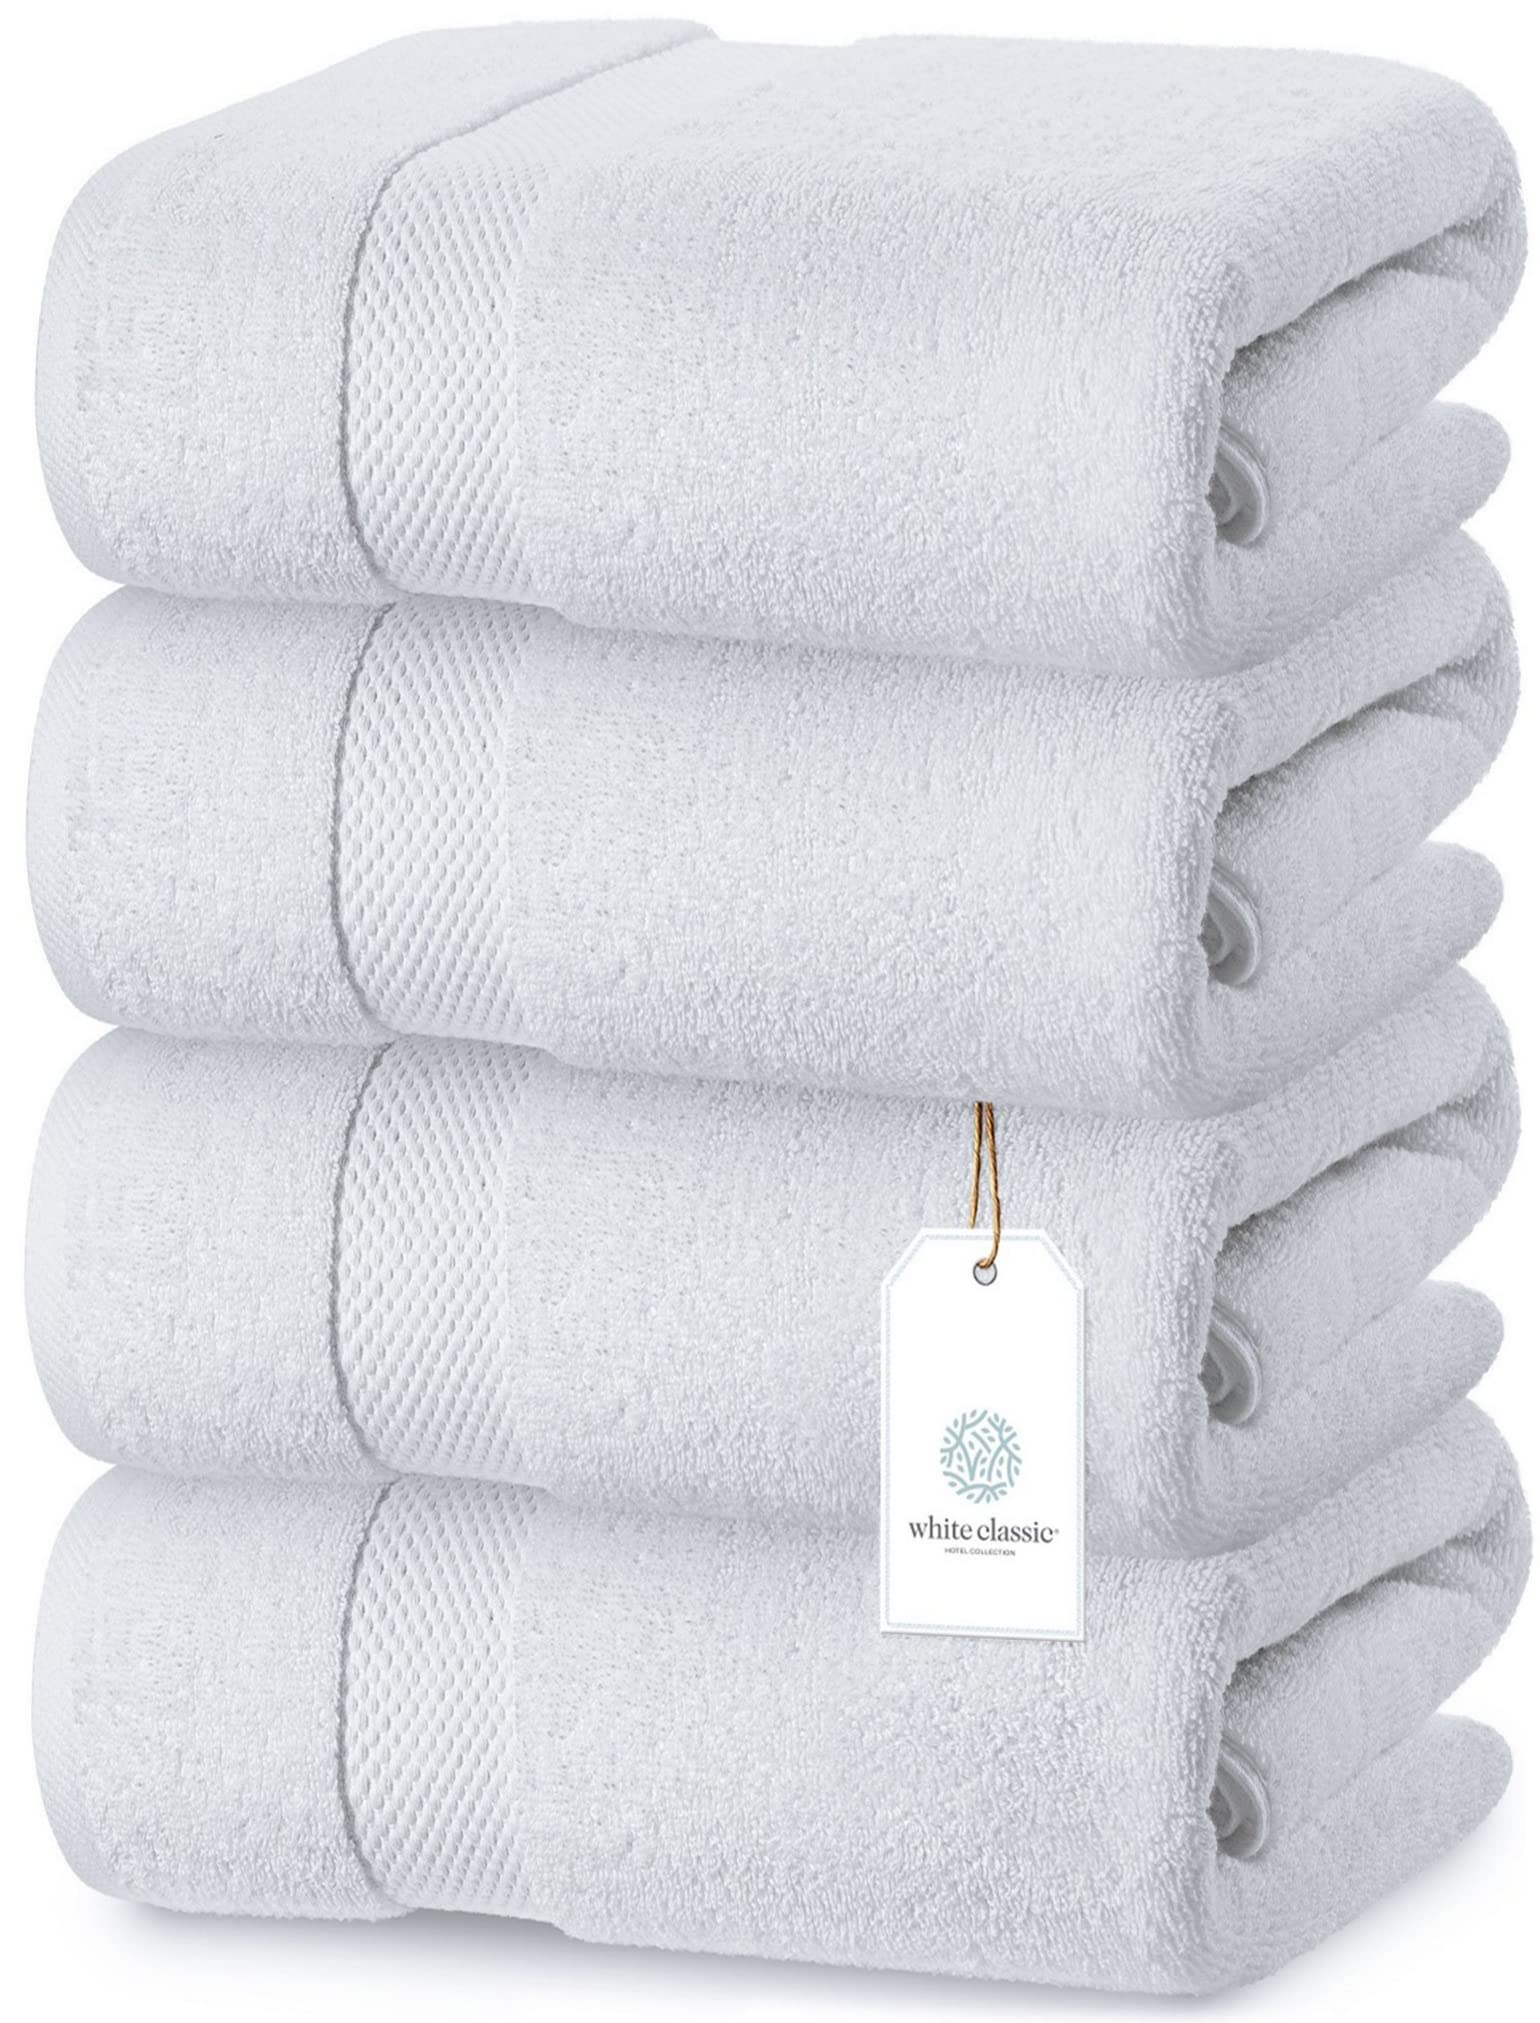 Extra Large Bath Towels Bathroom Set 100% Turkish Cotton Bath Sheet Luxury  Hotel Spa Towel Clean For Home Beach Towel Cover Up